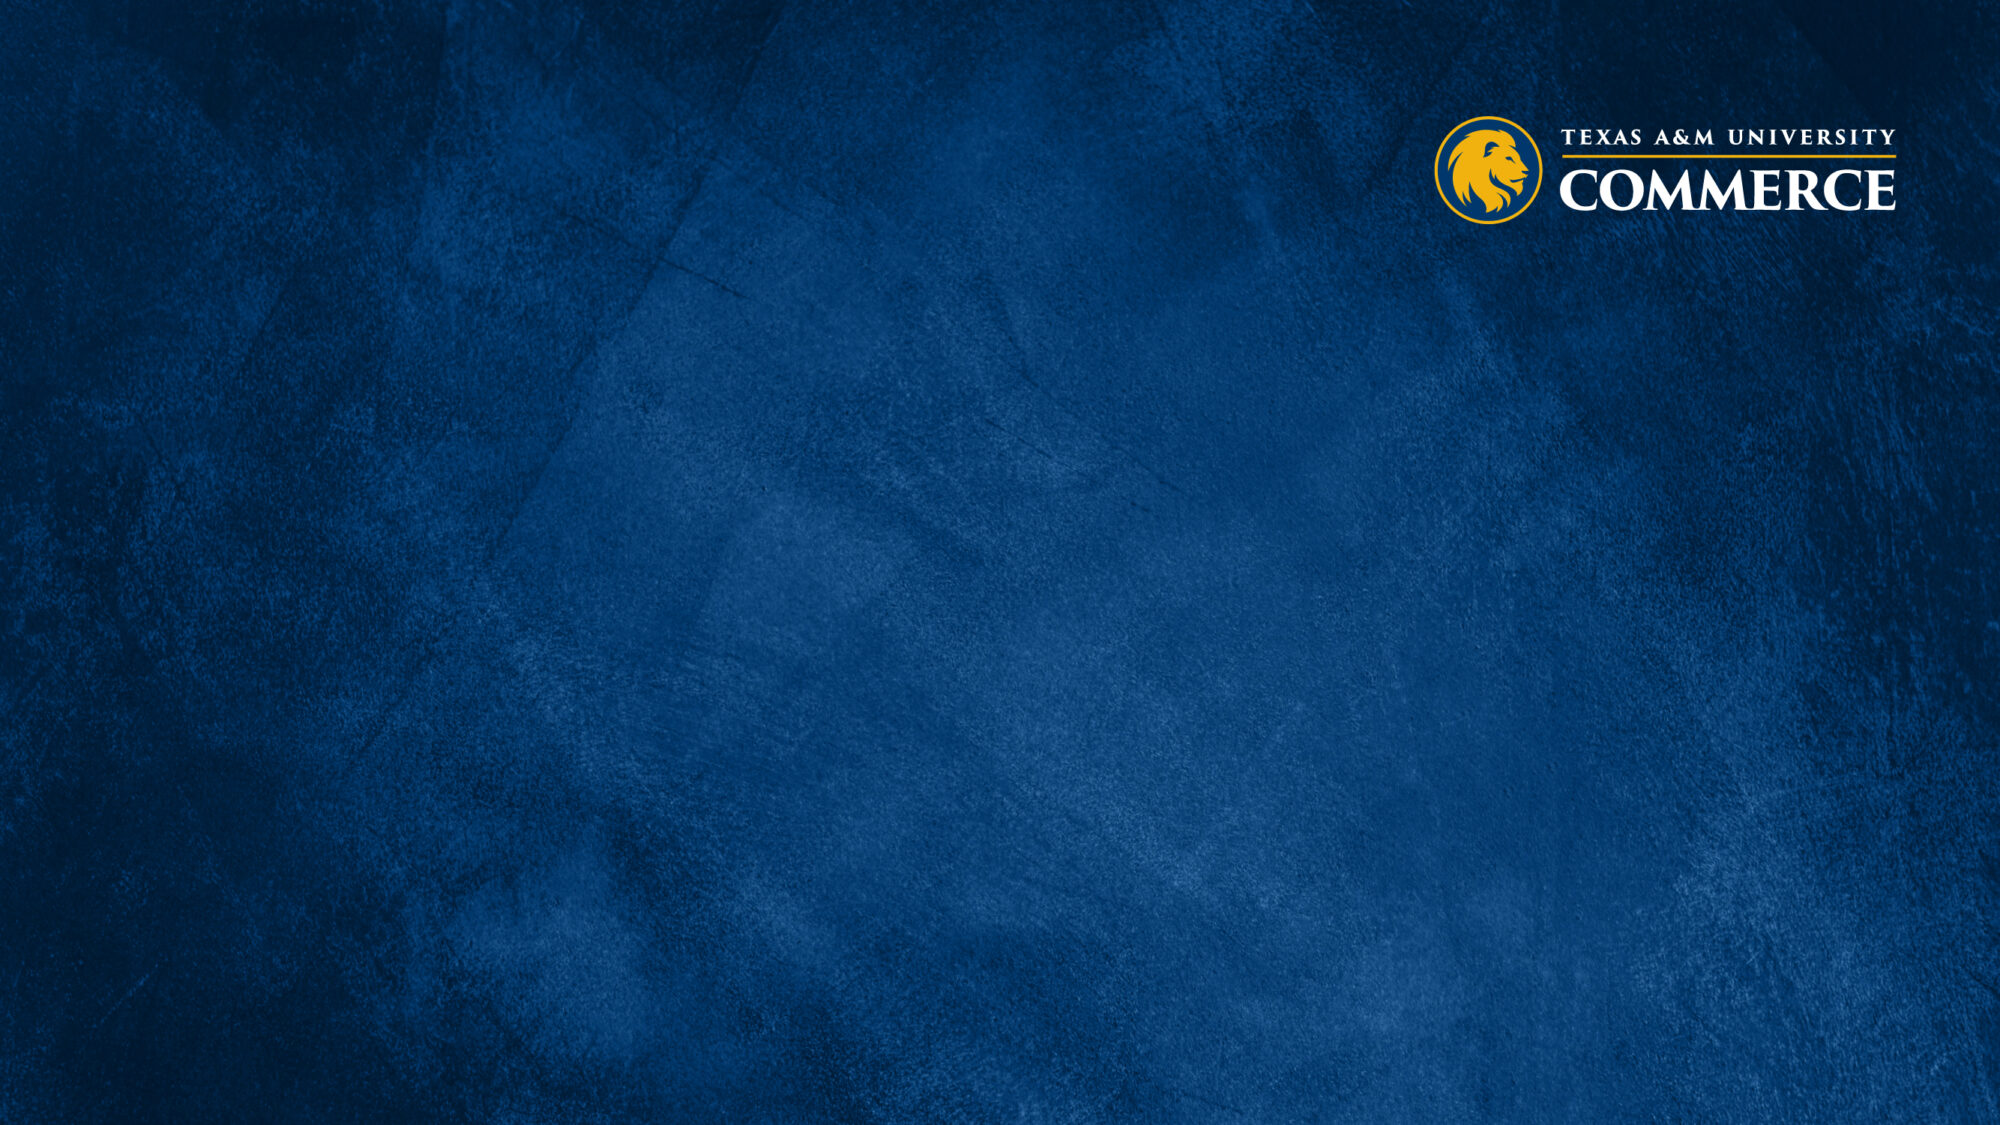 Blue background with Texas A&M University Commerce logo on the top right corner.